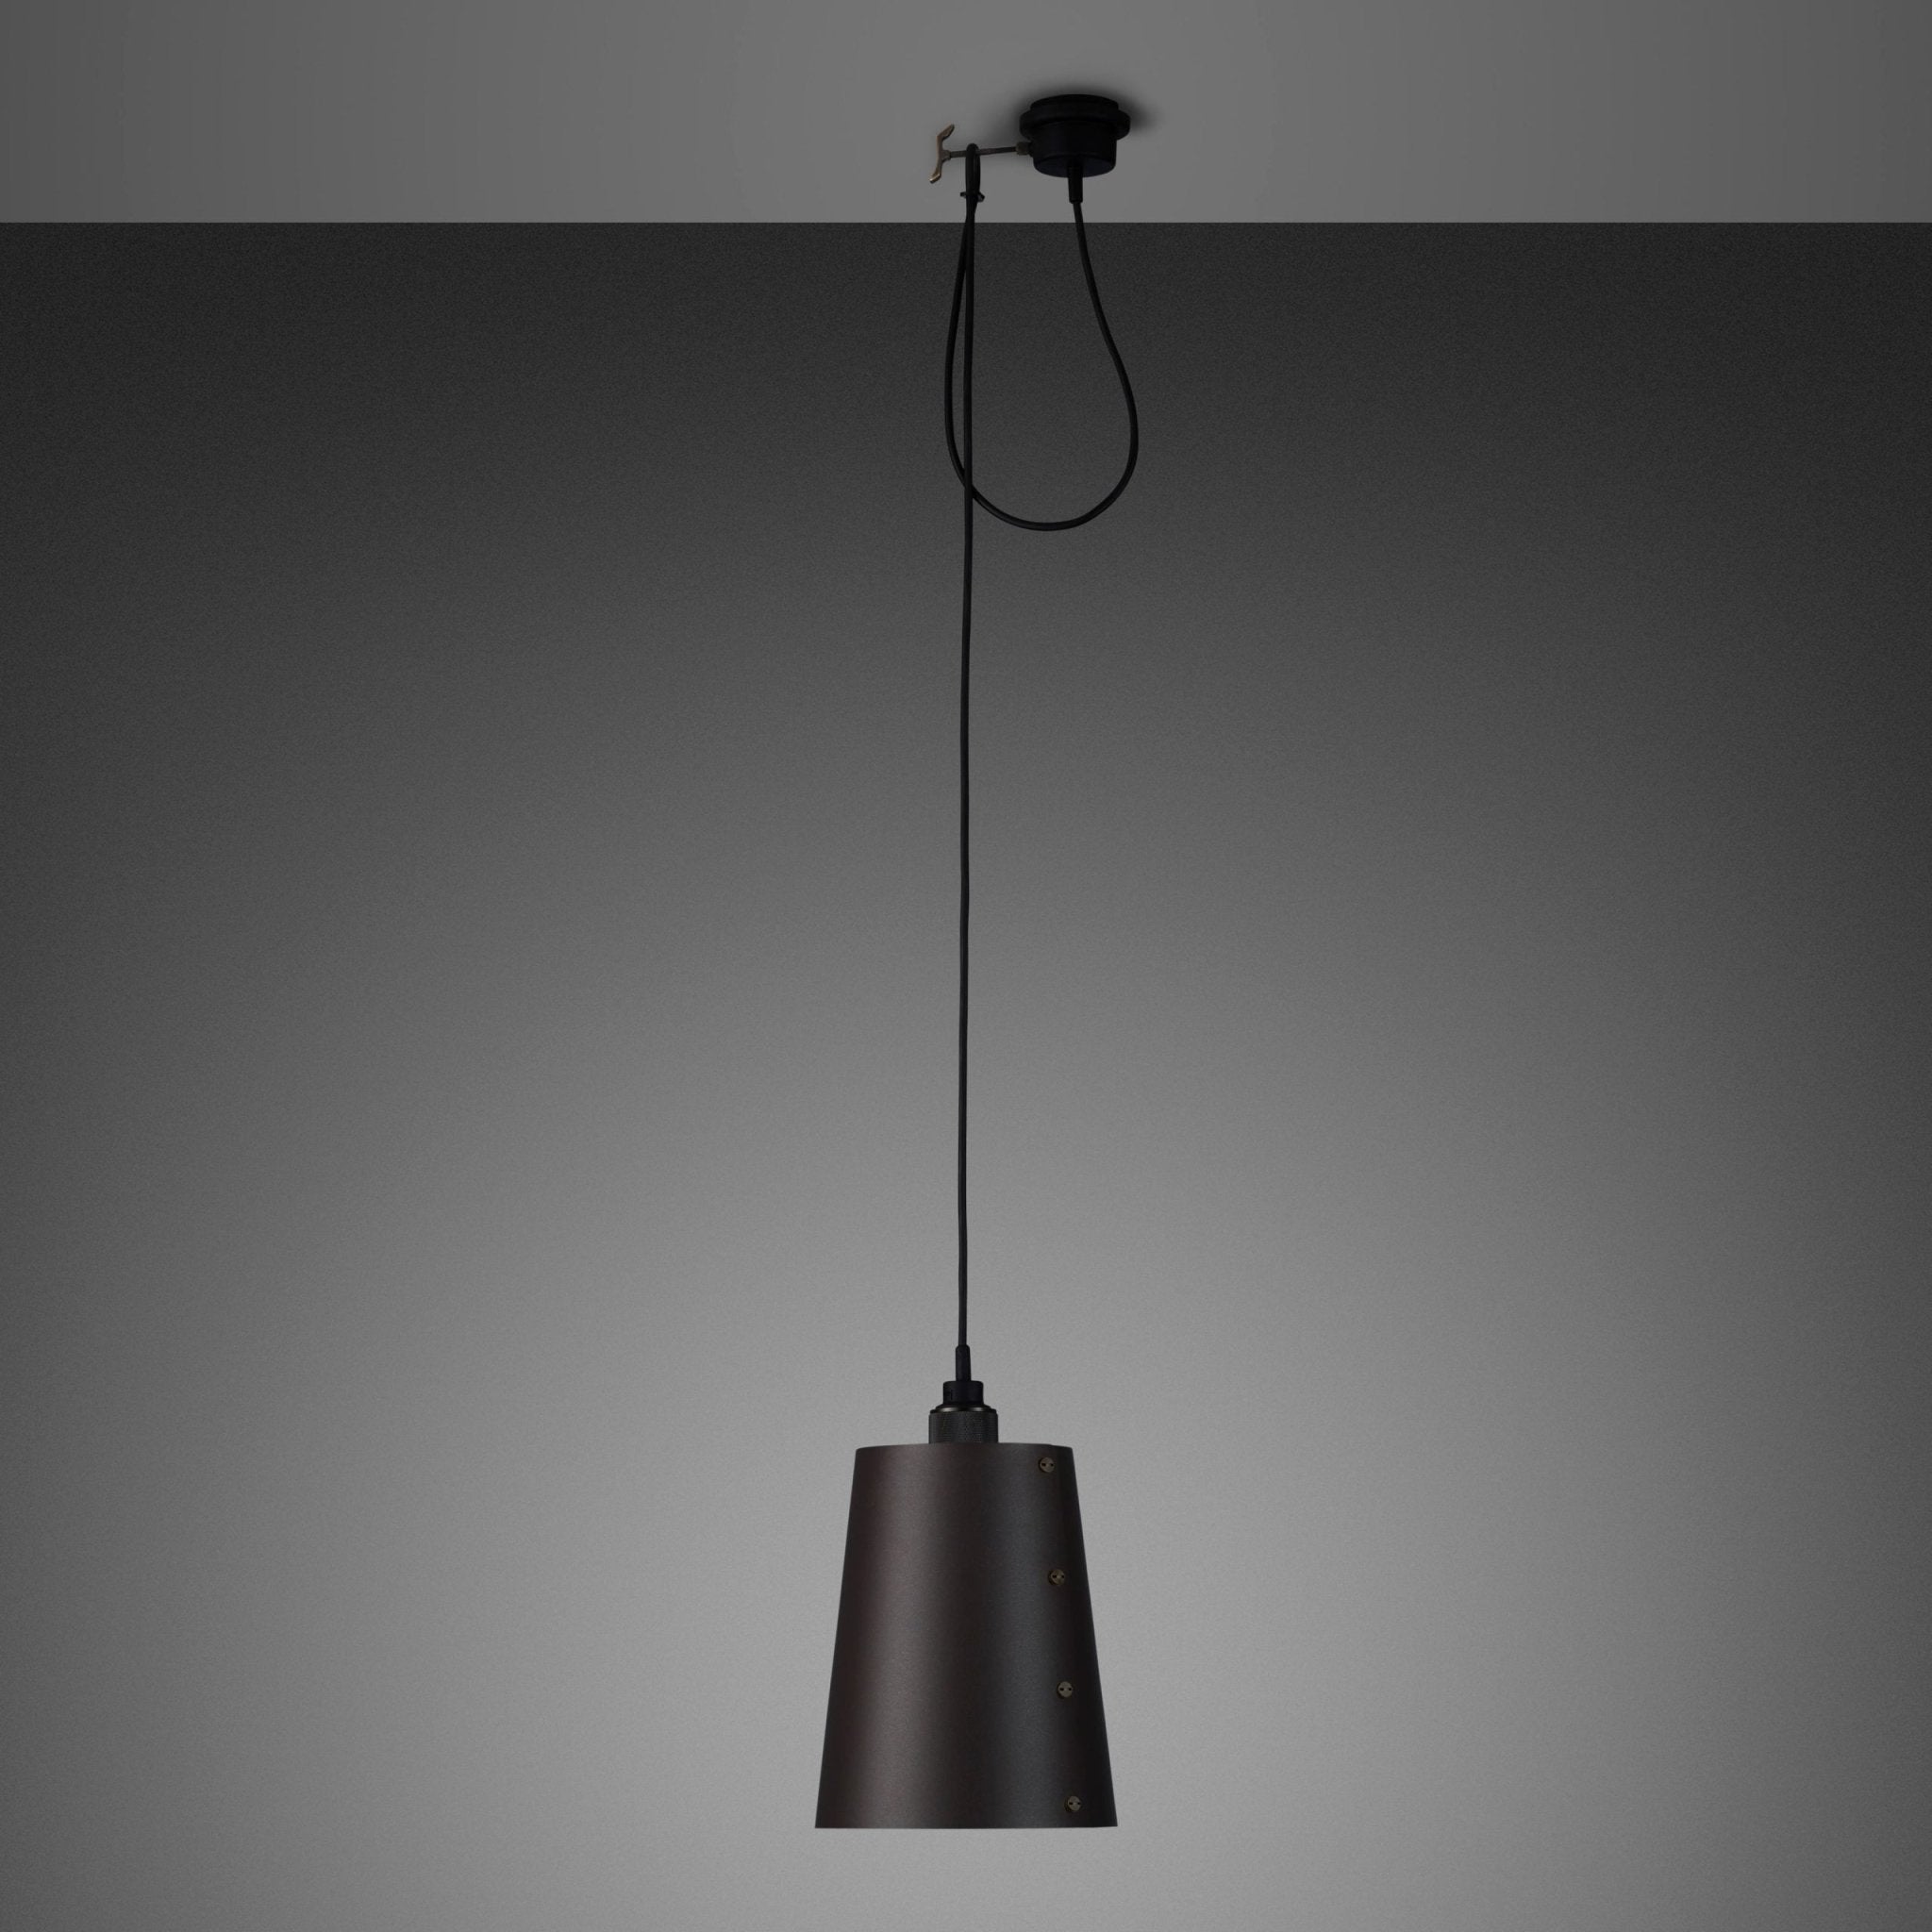 Buster and Punch - Hooked 1.0 / Groot Grafiet Shade 2.6m Hanglamp